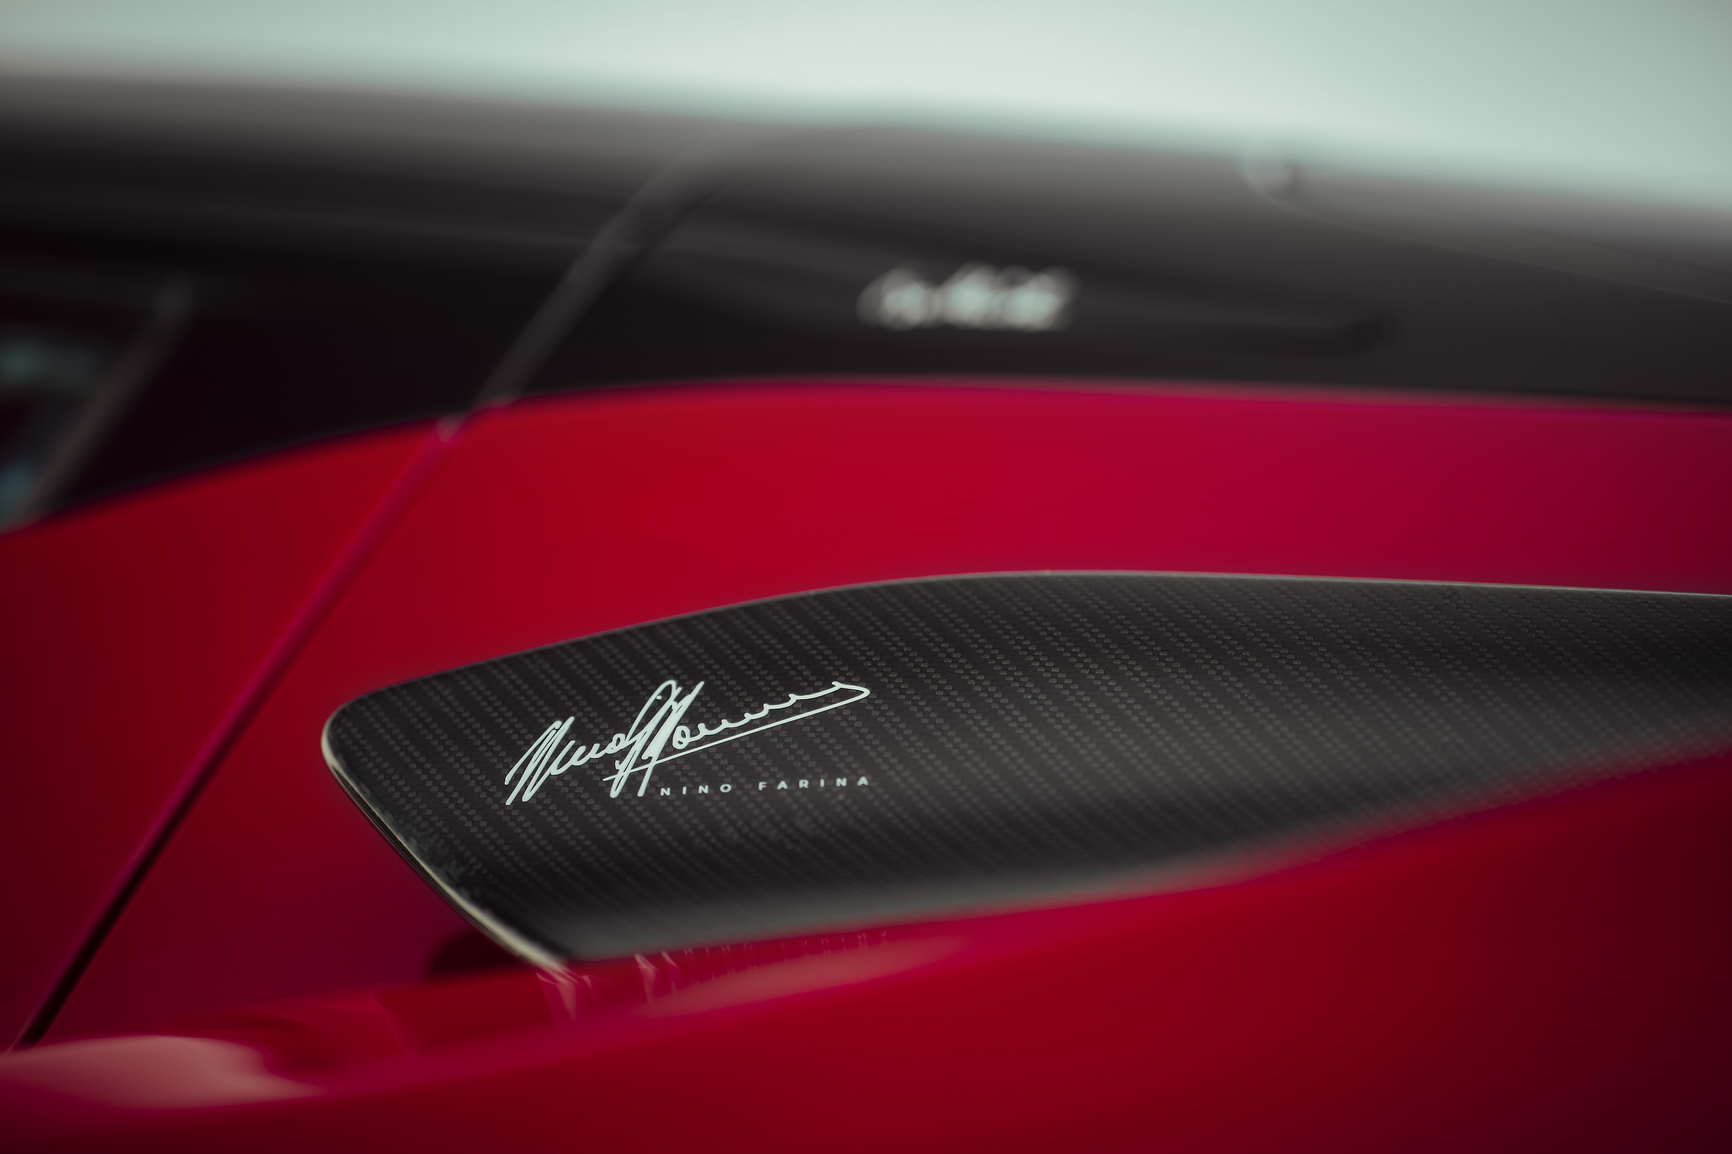 The New Battista Edizione Nino Farina is a new hyper GT inspired by its family legacy